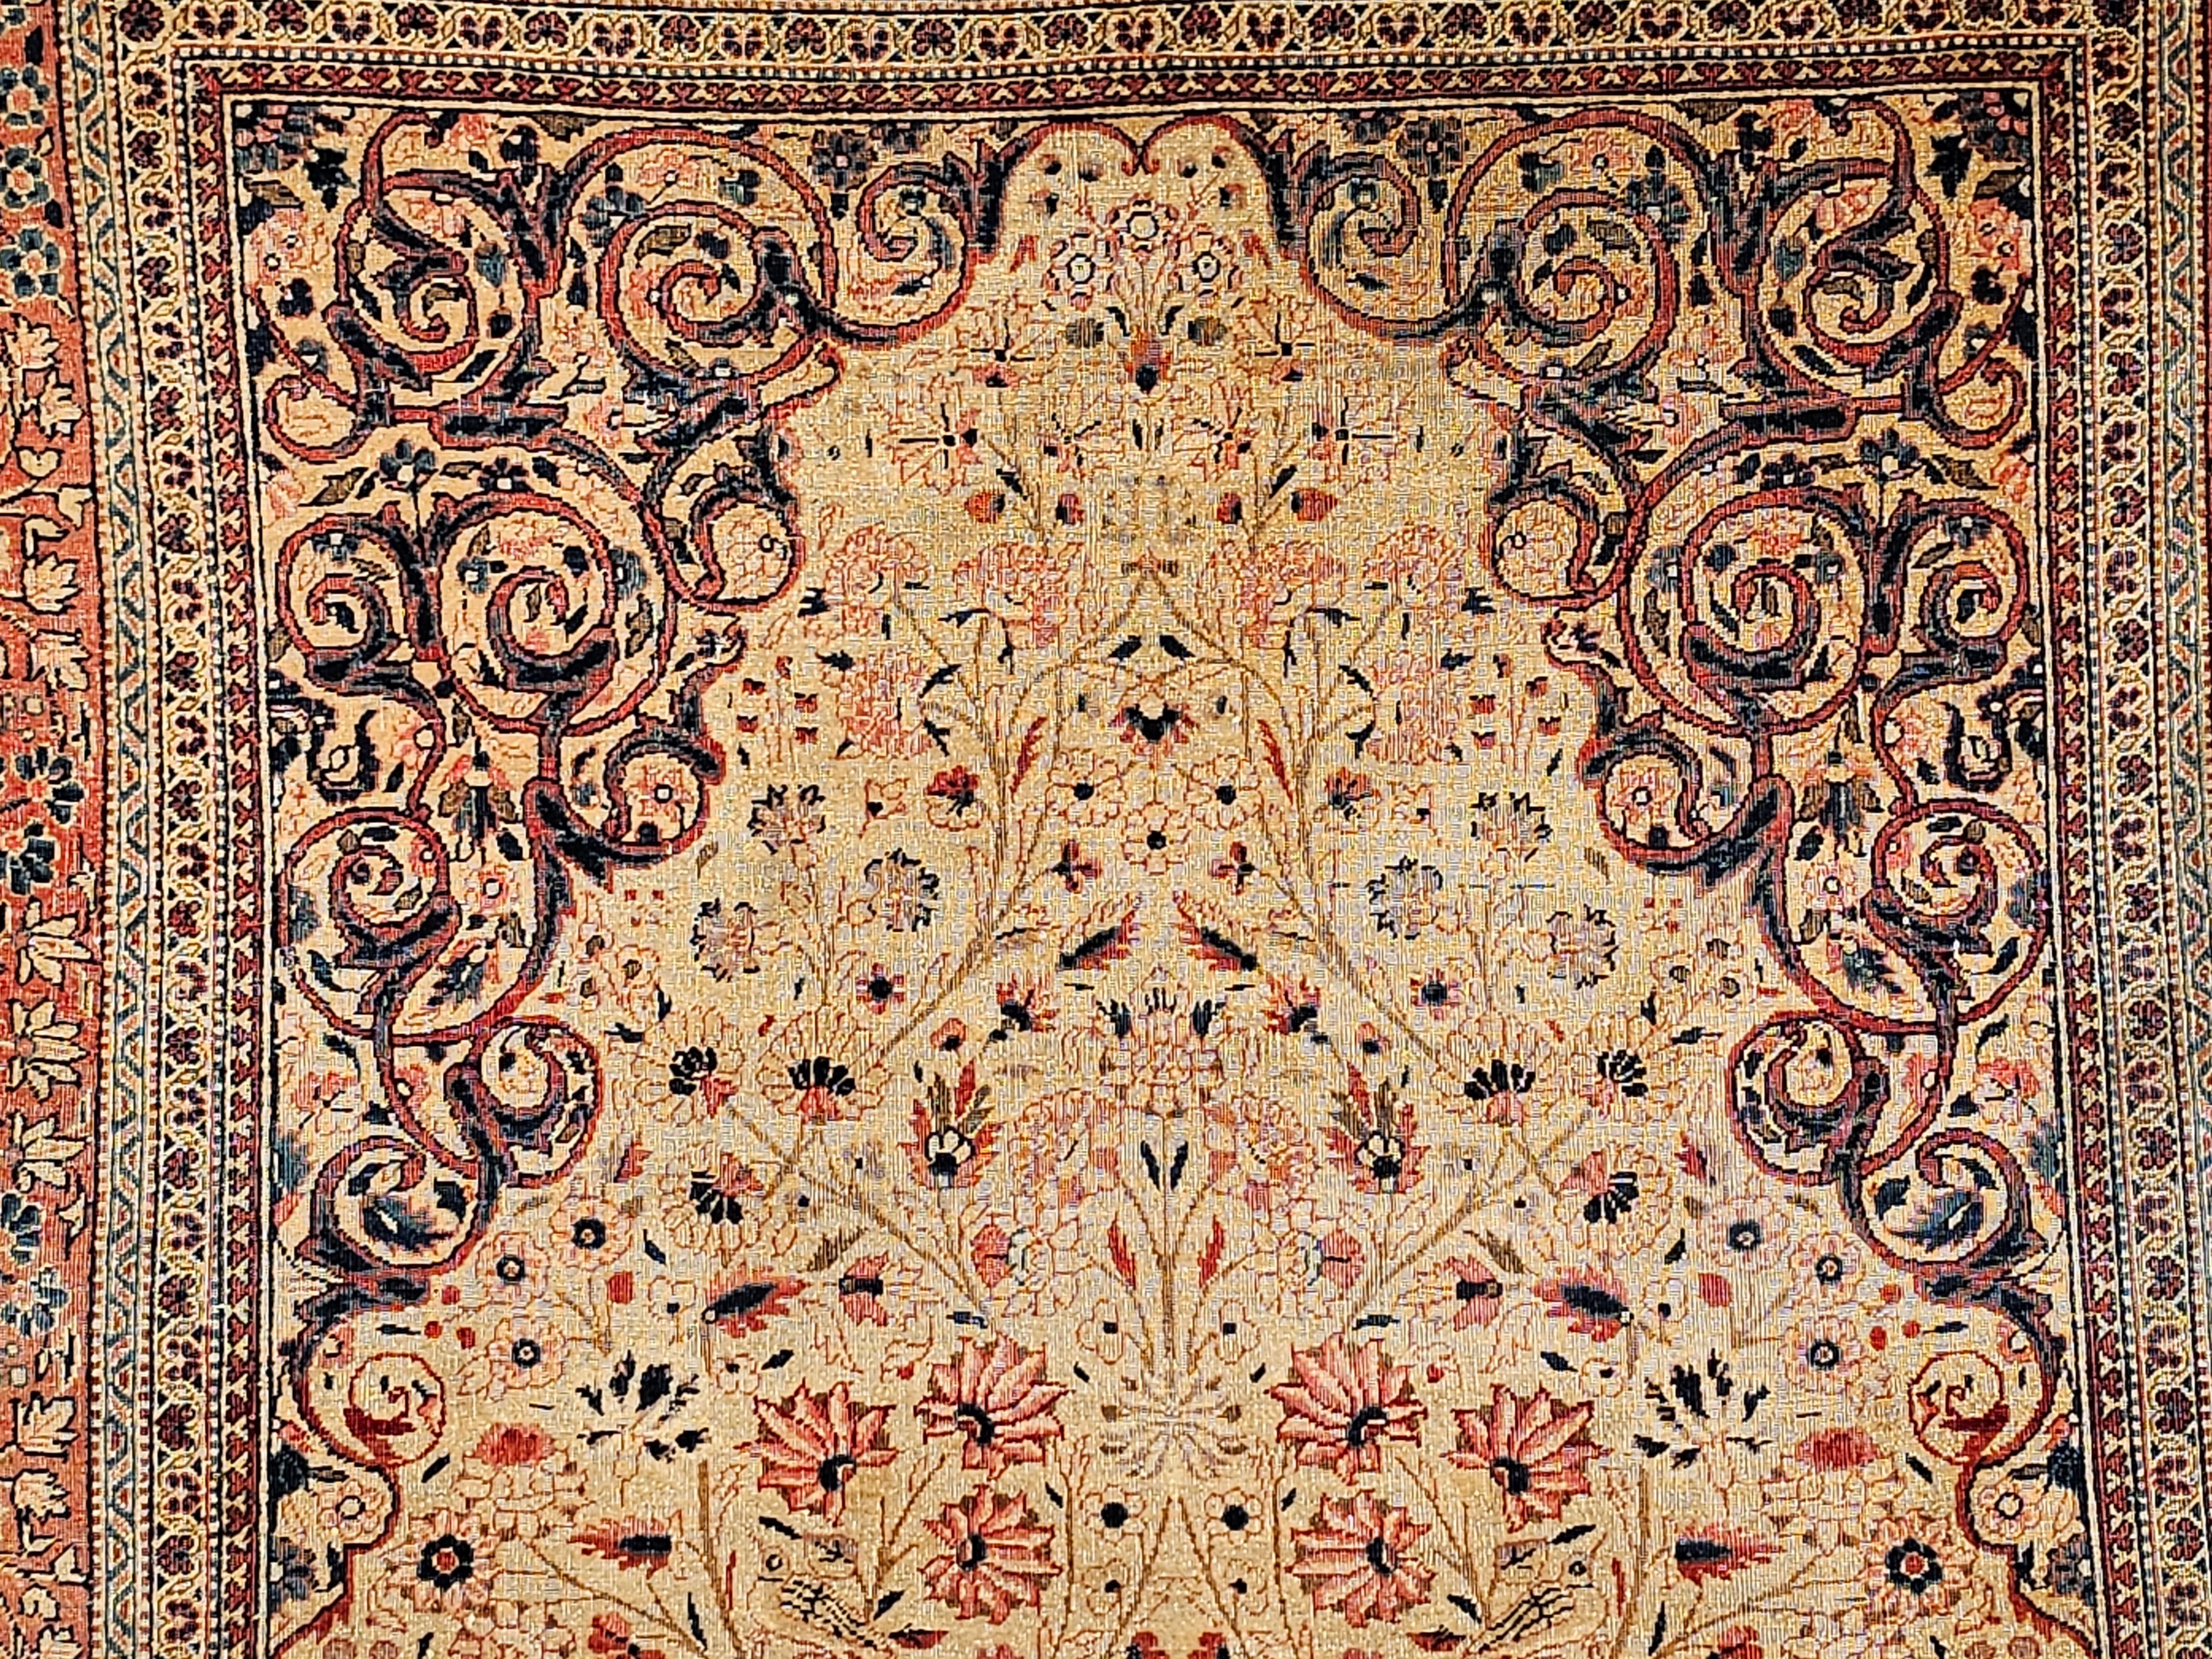 19th Century Persian Kashan “Tree of Life” Vase Rug in Ivory, Brick Red, Navy In Good Condition For Sale In Barrington, IL